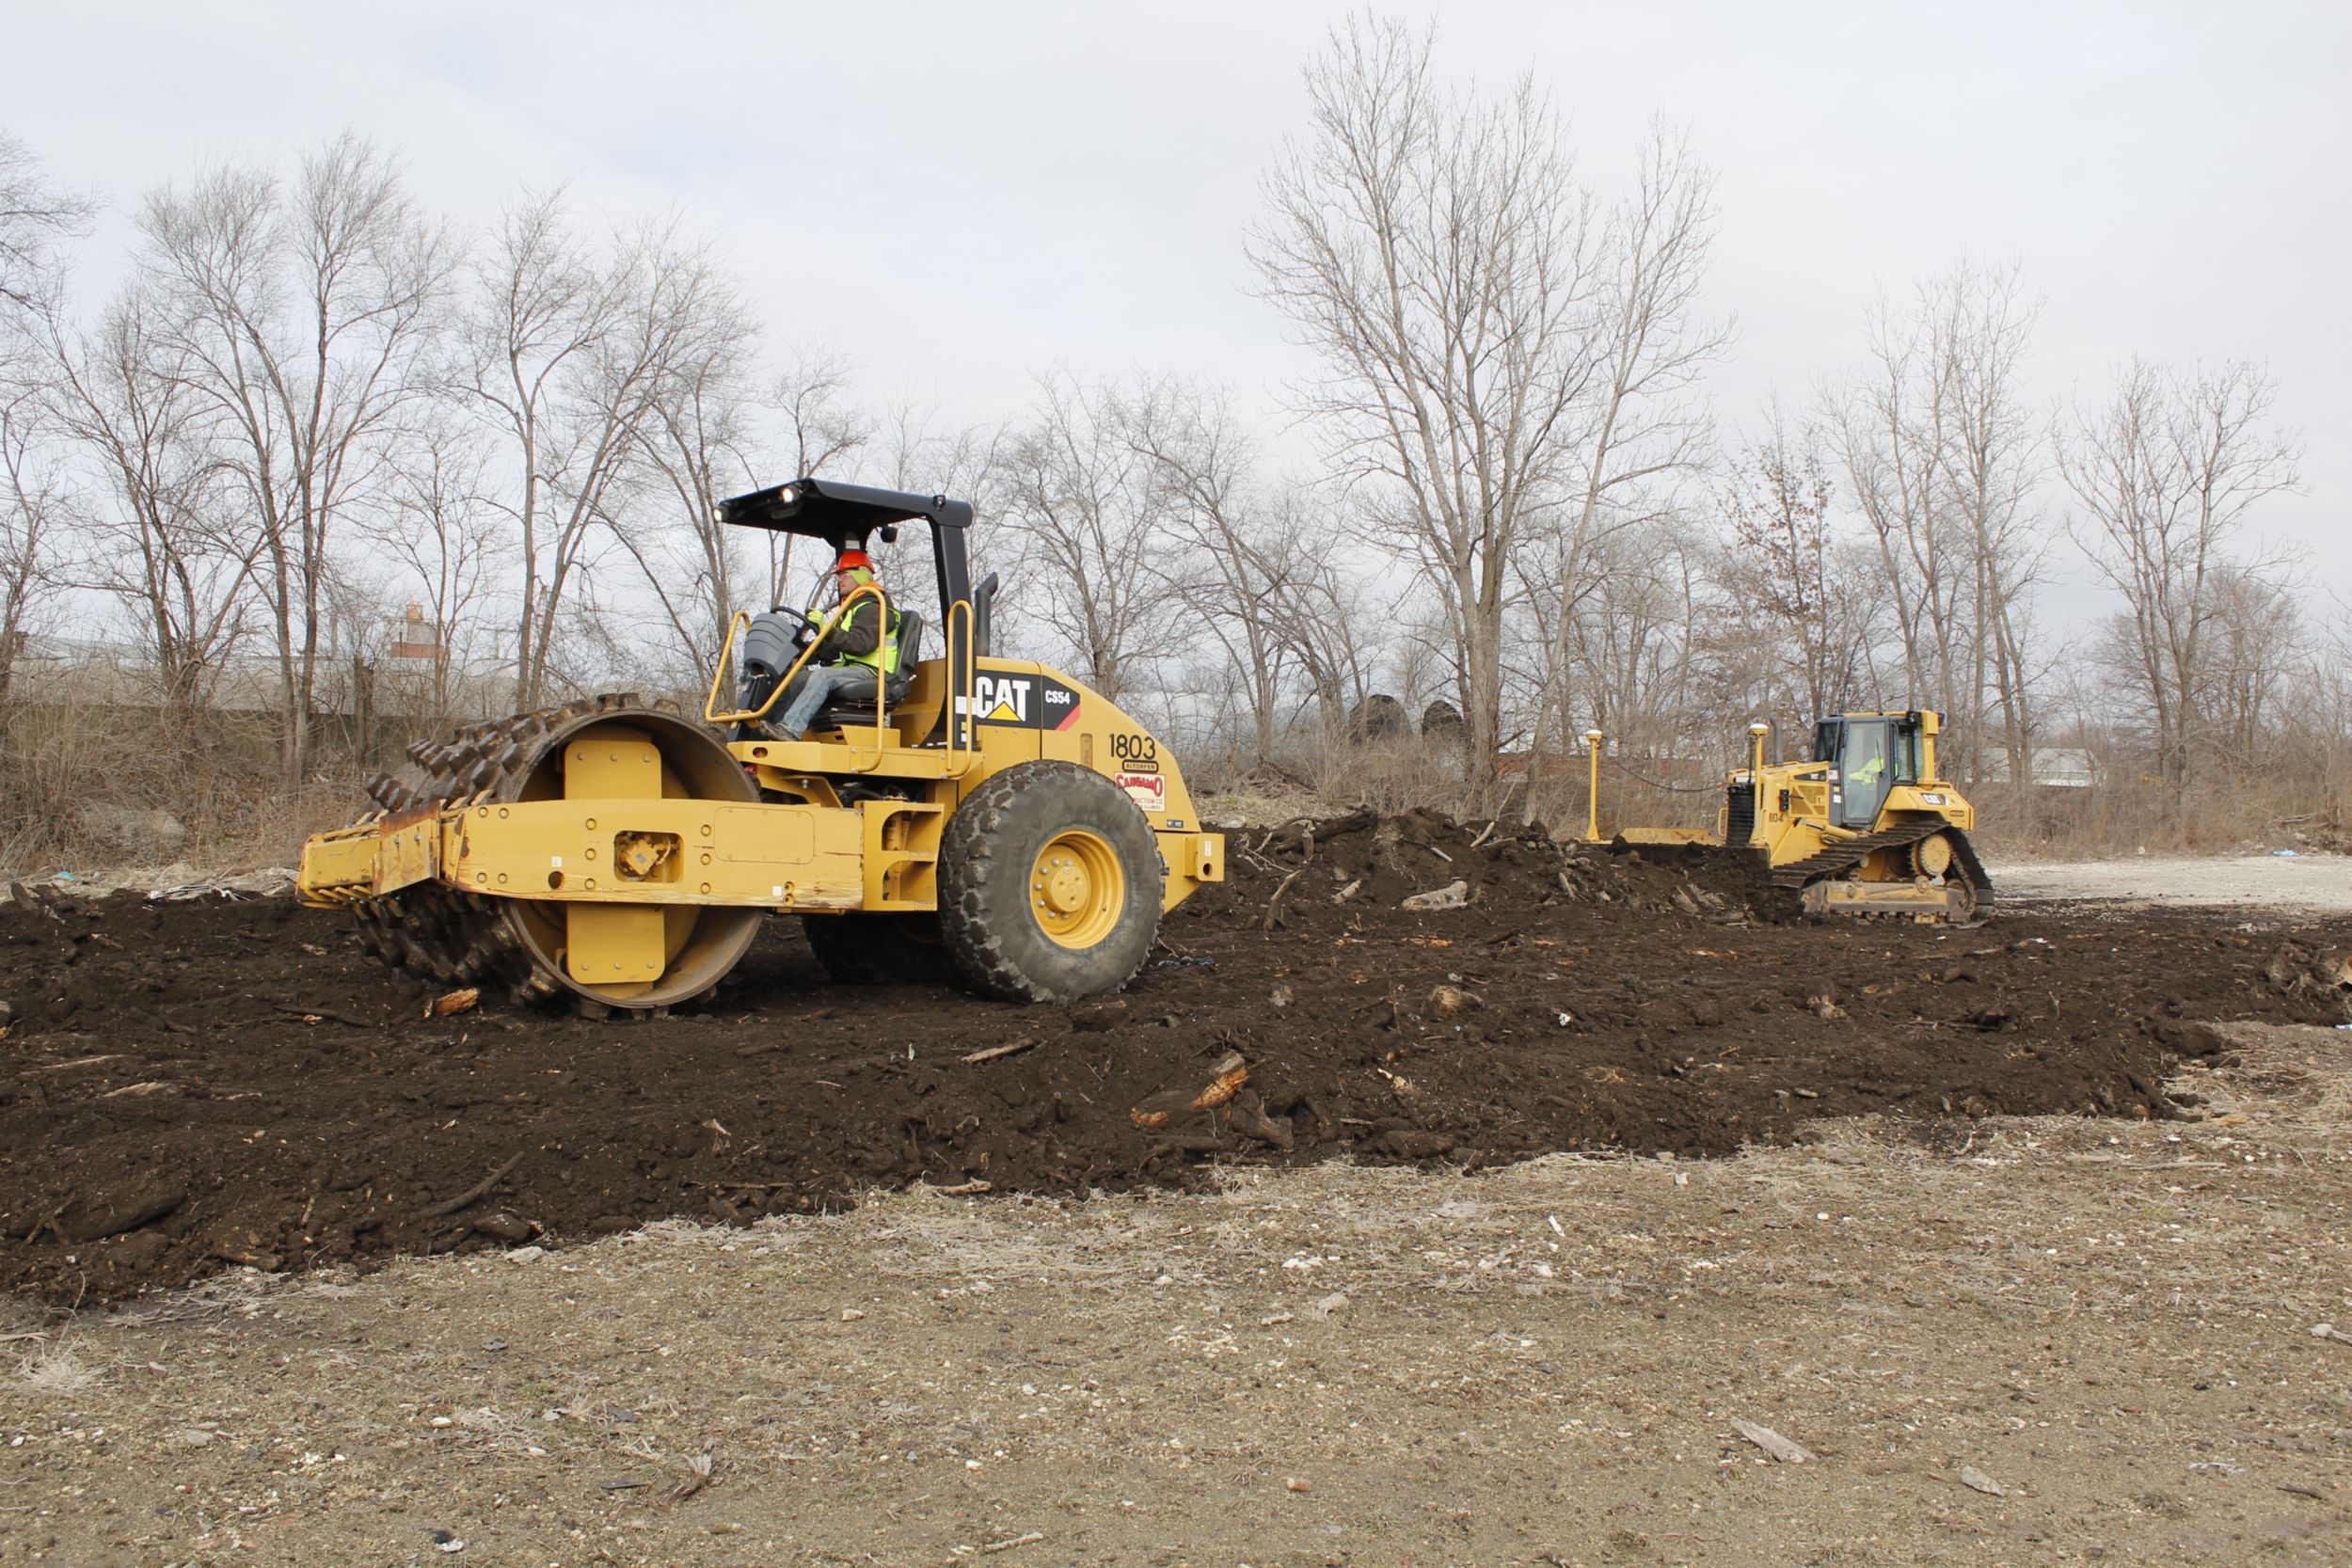 Cat® Used Equipment and Cat Dealer the Right Partners for Construction Co